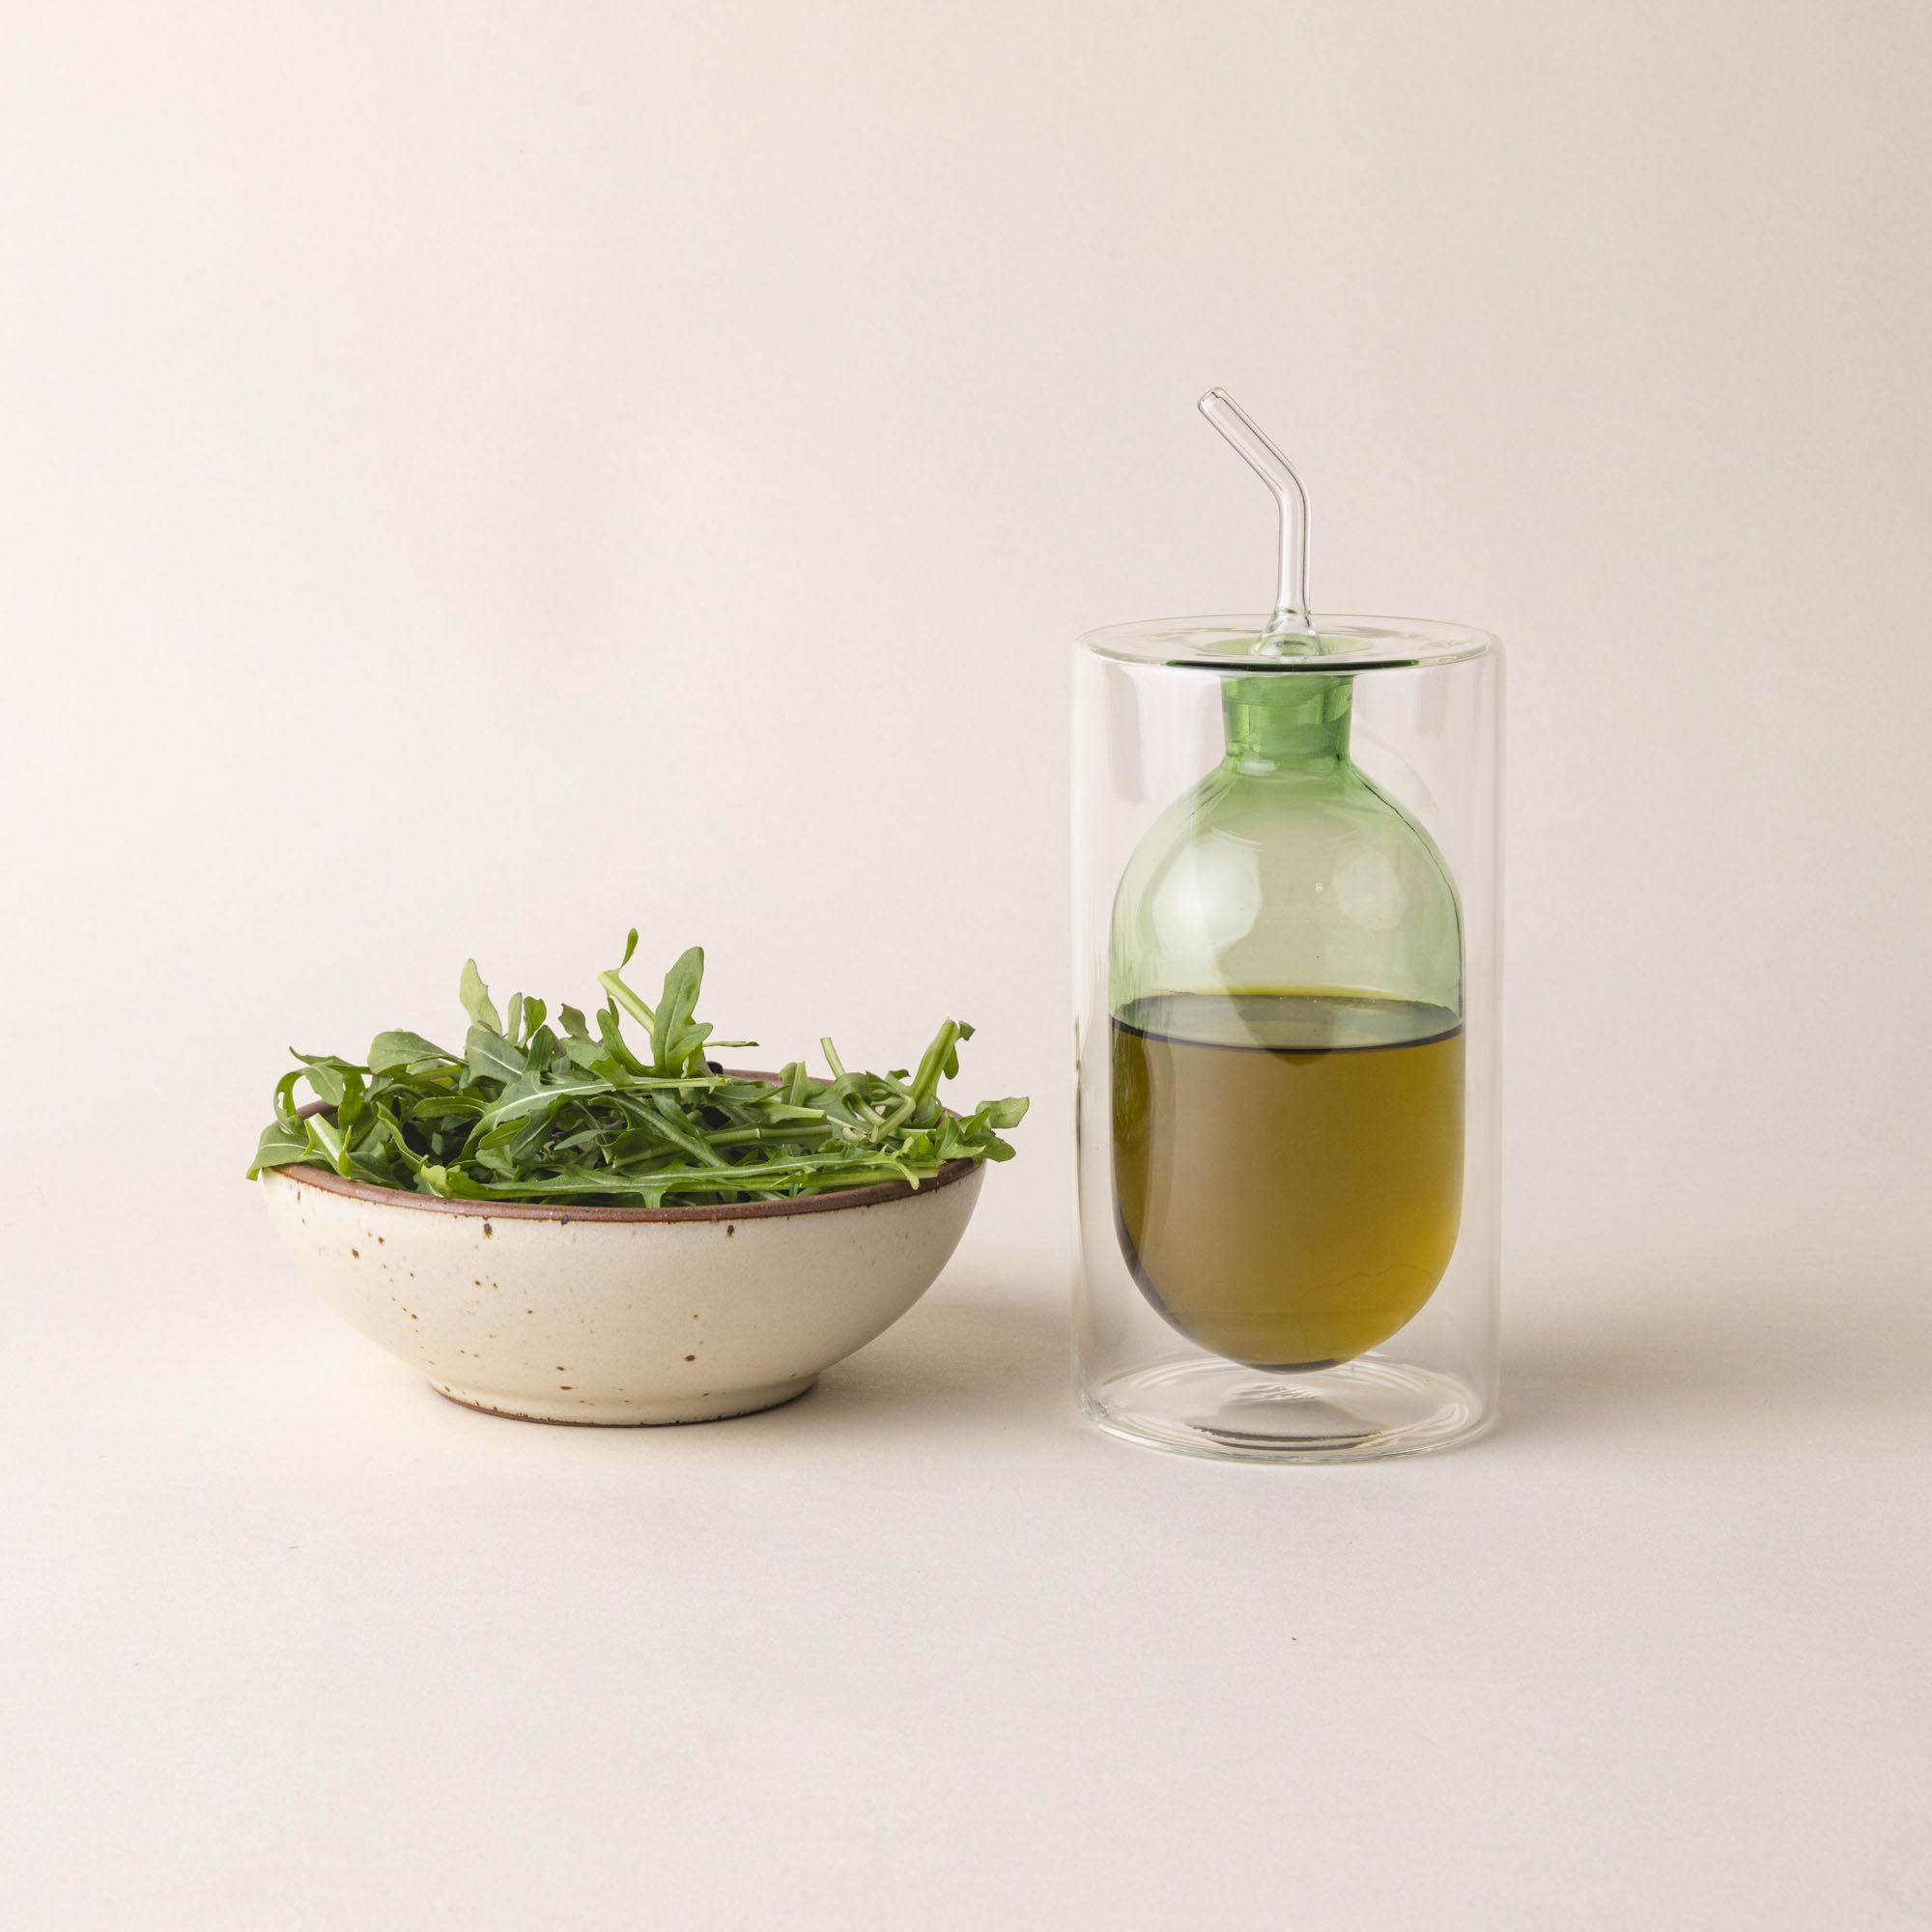 An artful glass cruet in a green color and next to a small side salad. There is a rounded bulb that acts as a container for the cruet, surrounded by a doubled glass wall. The cruet is filled with oil.